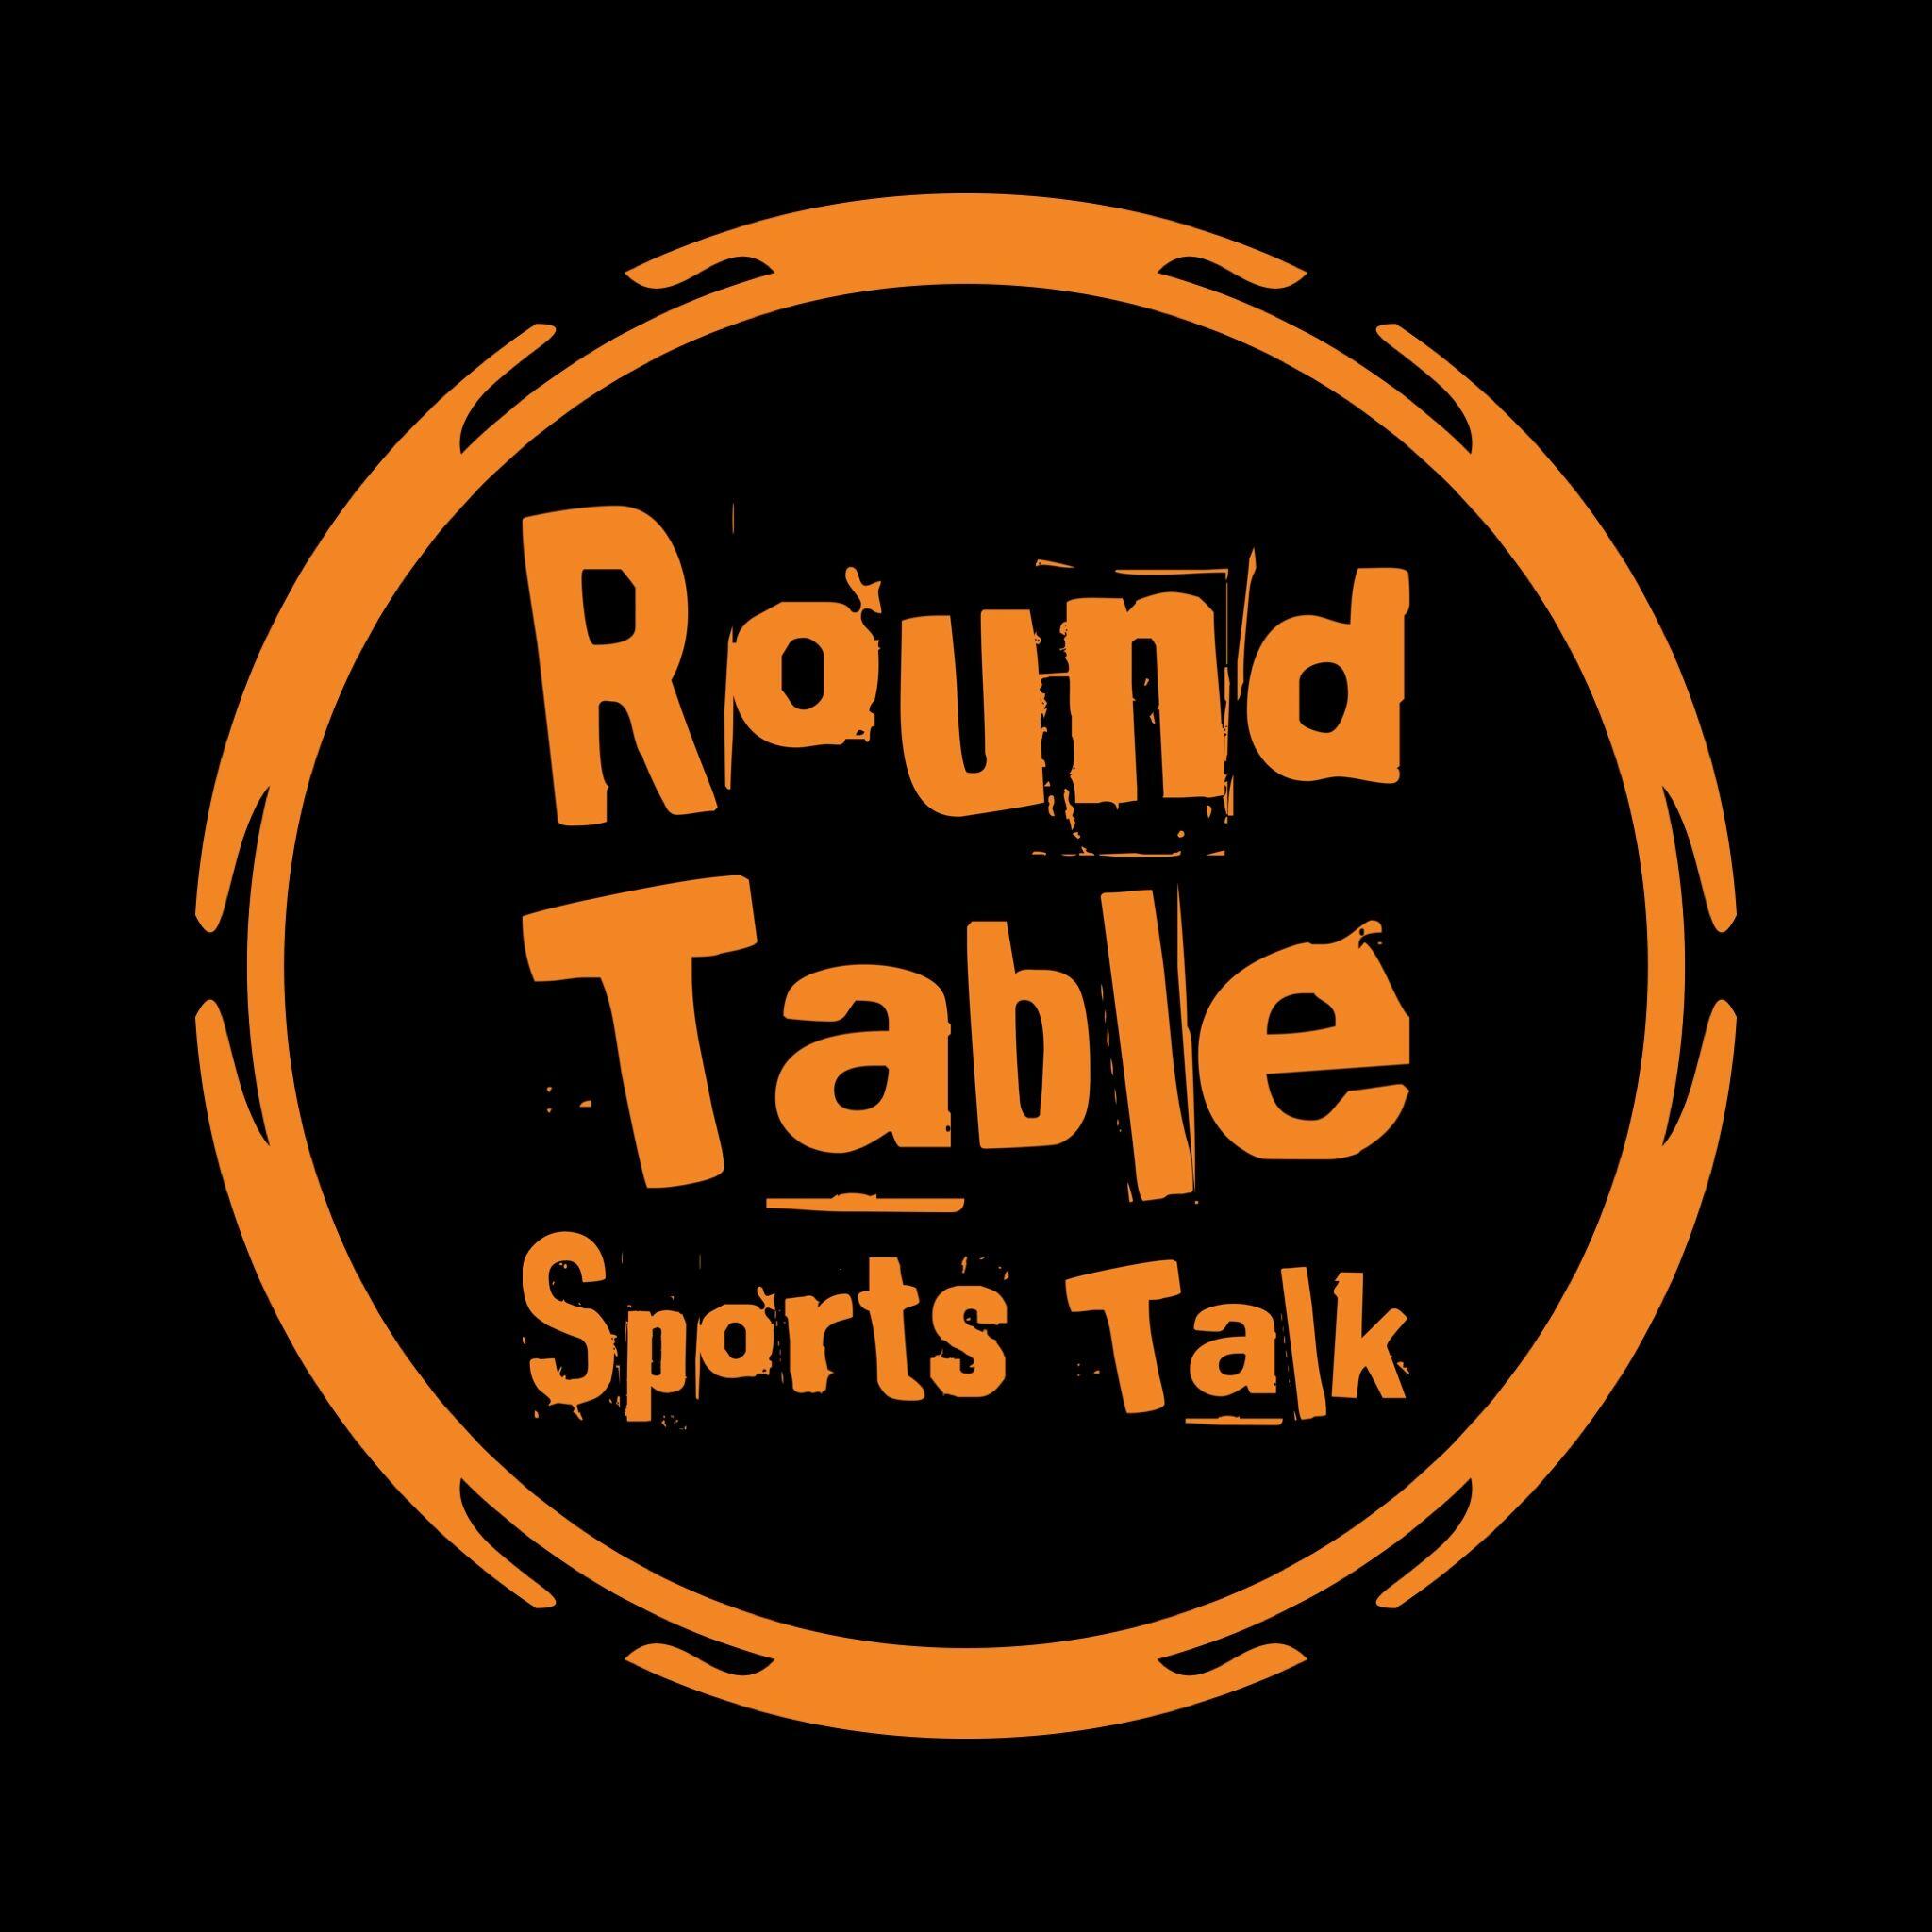 Talk round. First Round. The game Design Round Table Podcast.